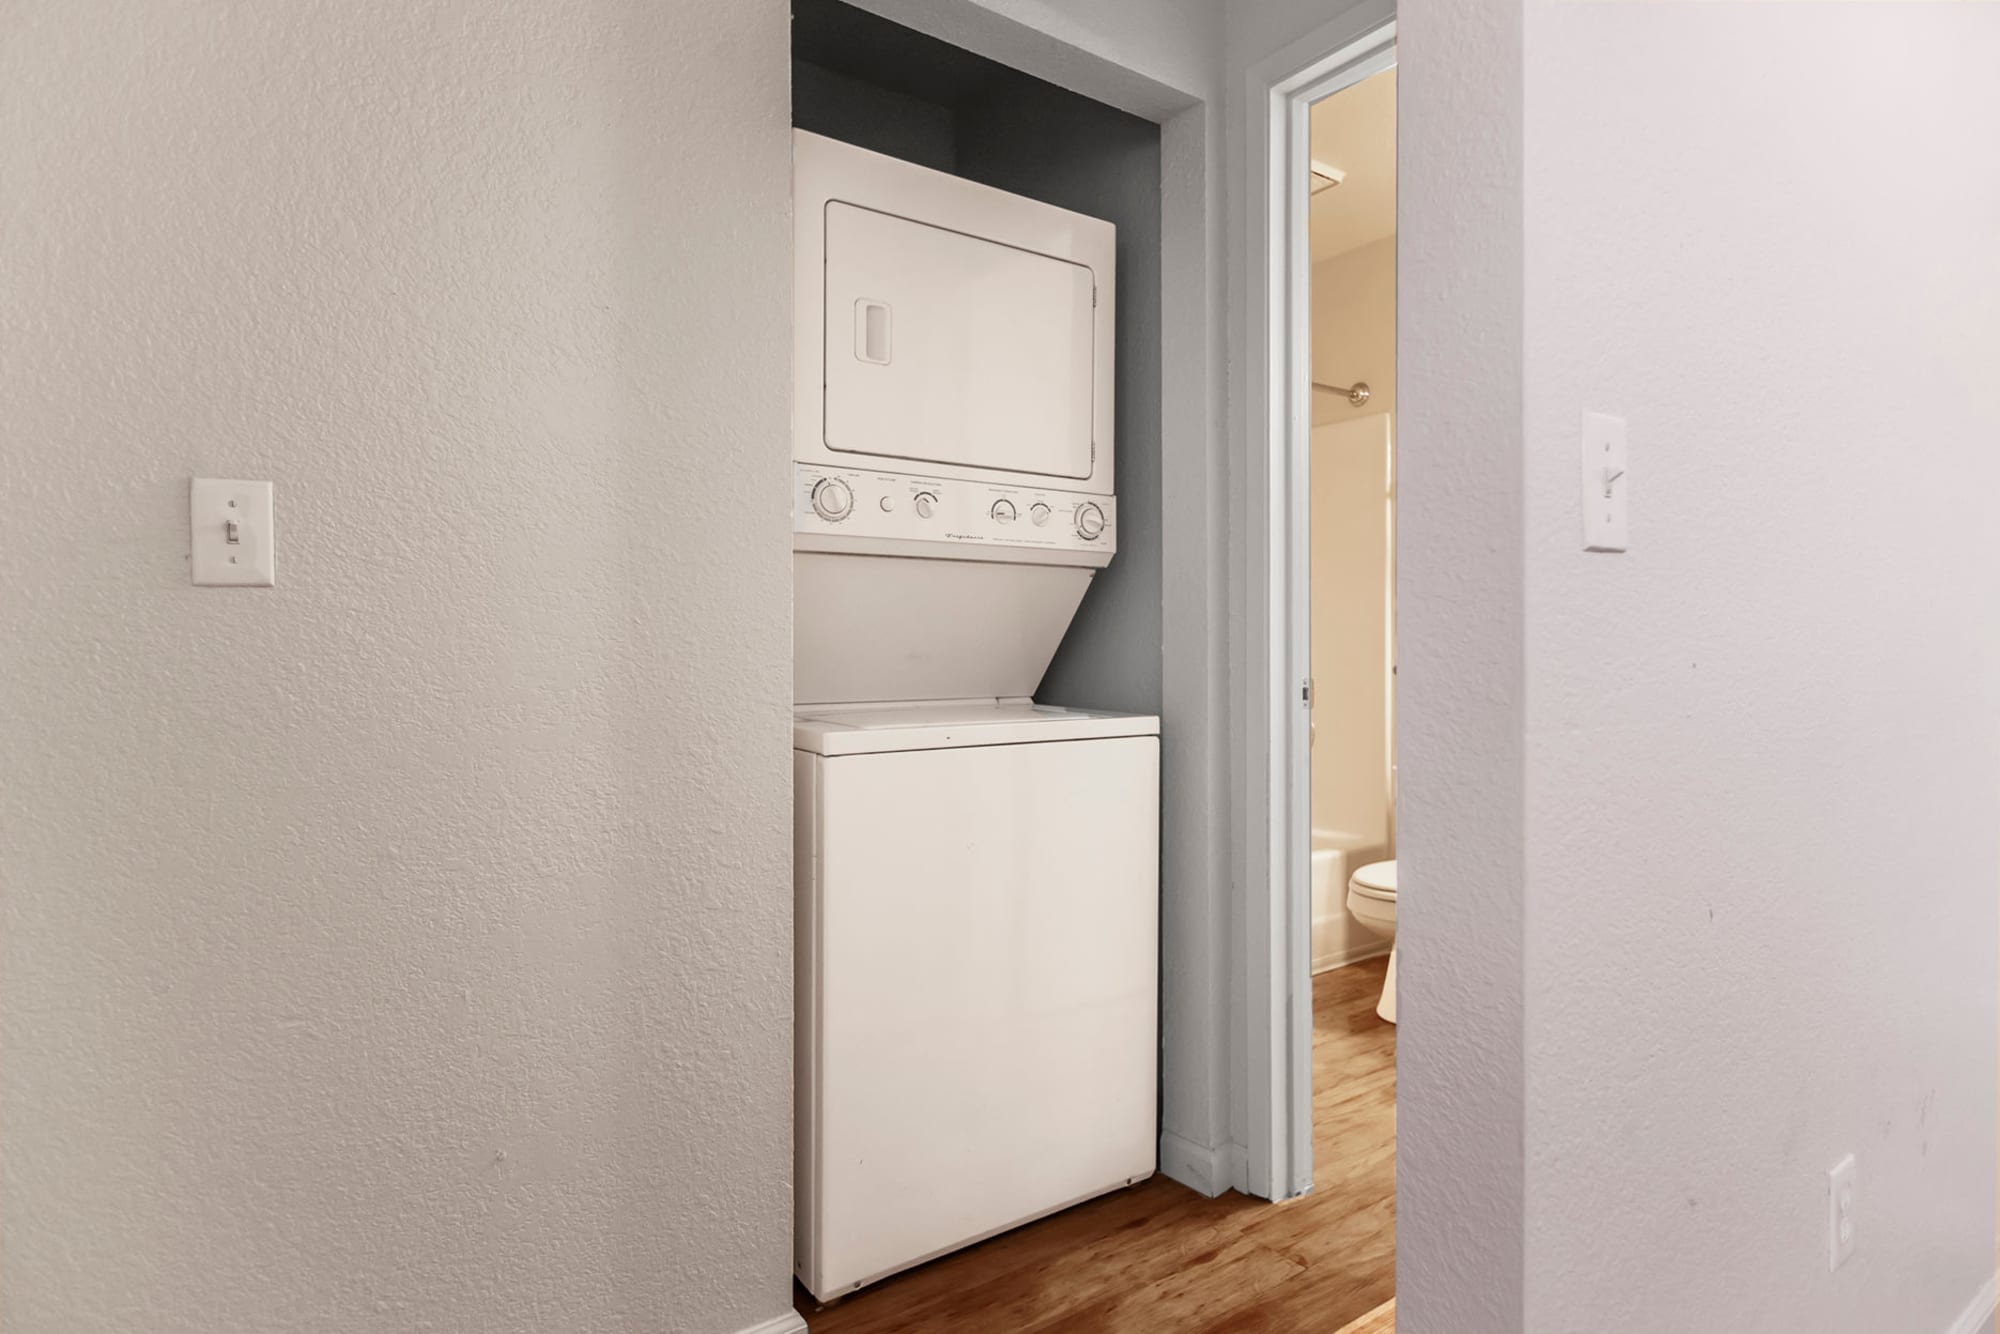 Washer and dryer stack-able at Sommerset Apartments in Vacaville, CA